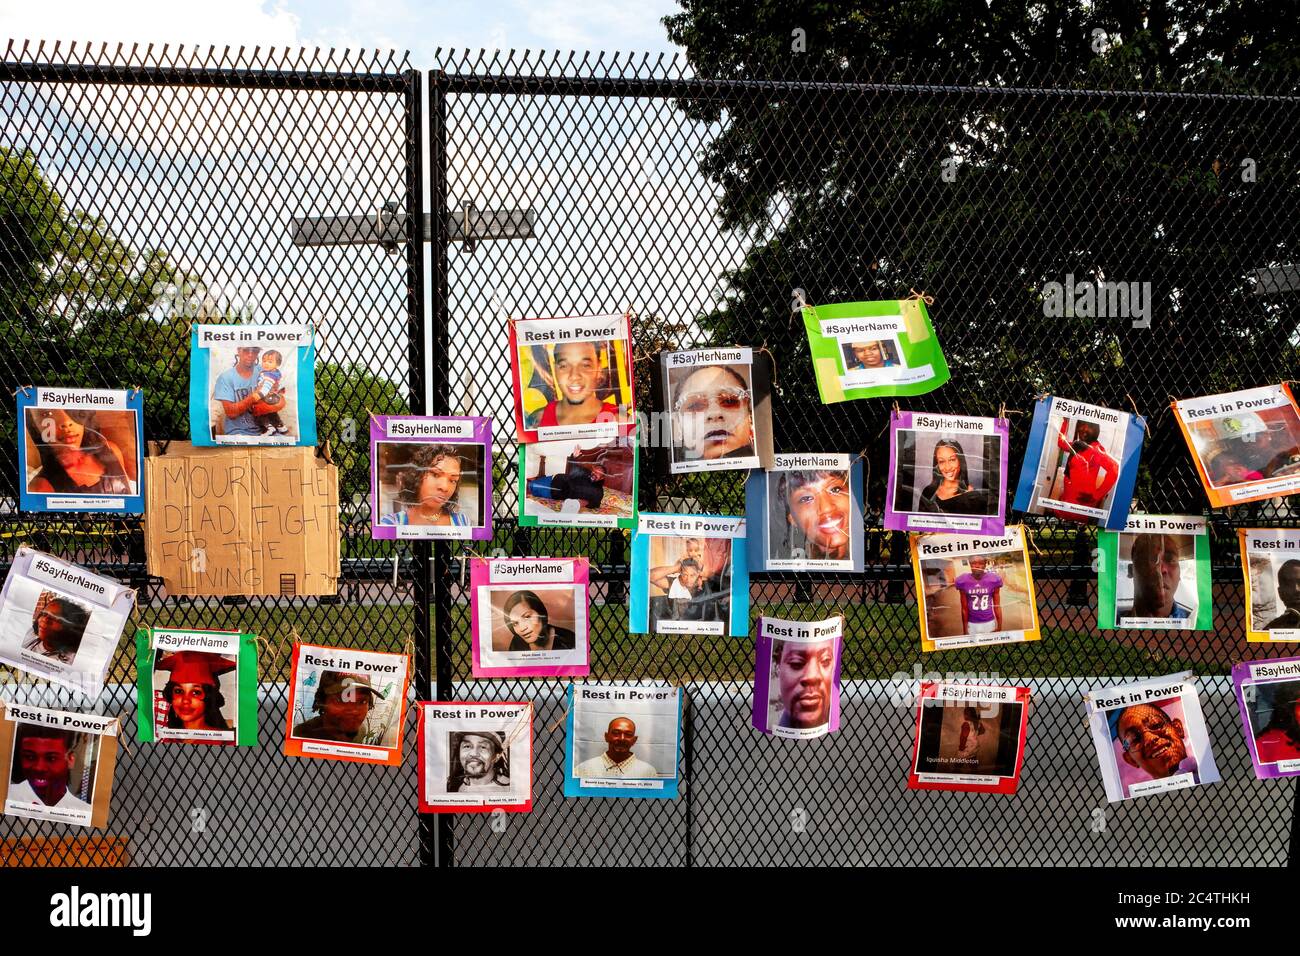 Photos of victims of murdered by police hang on the fence around Lafayette Square and the White House, Washington, DC, United States Stock Photo